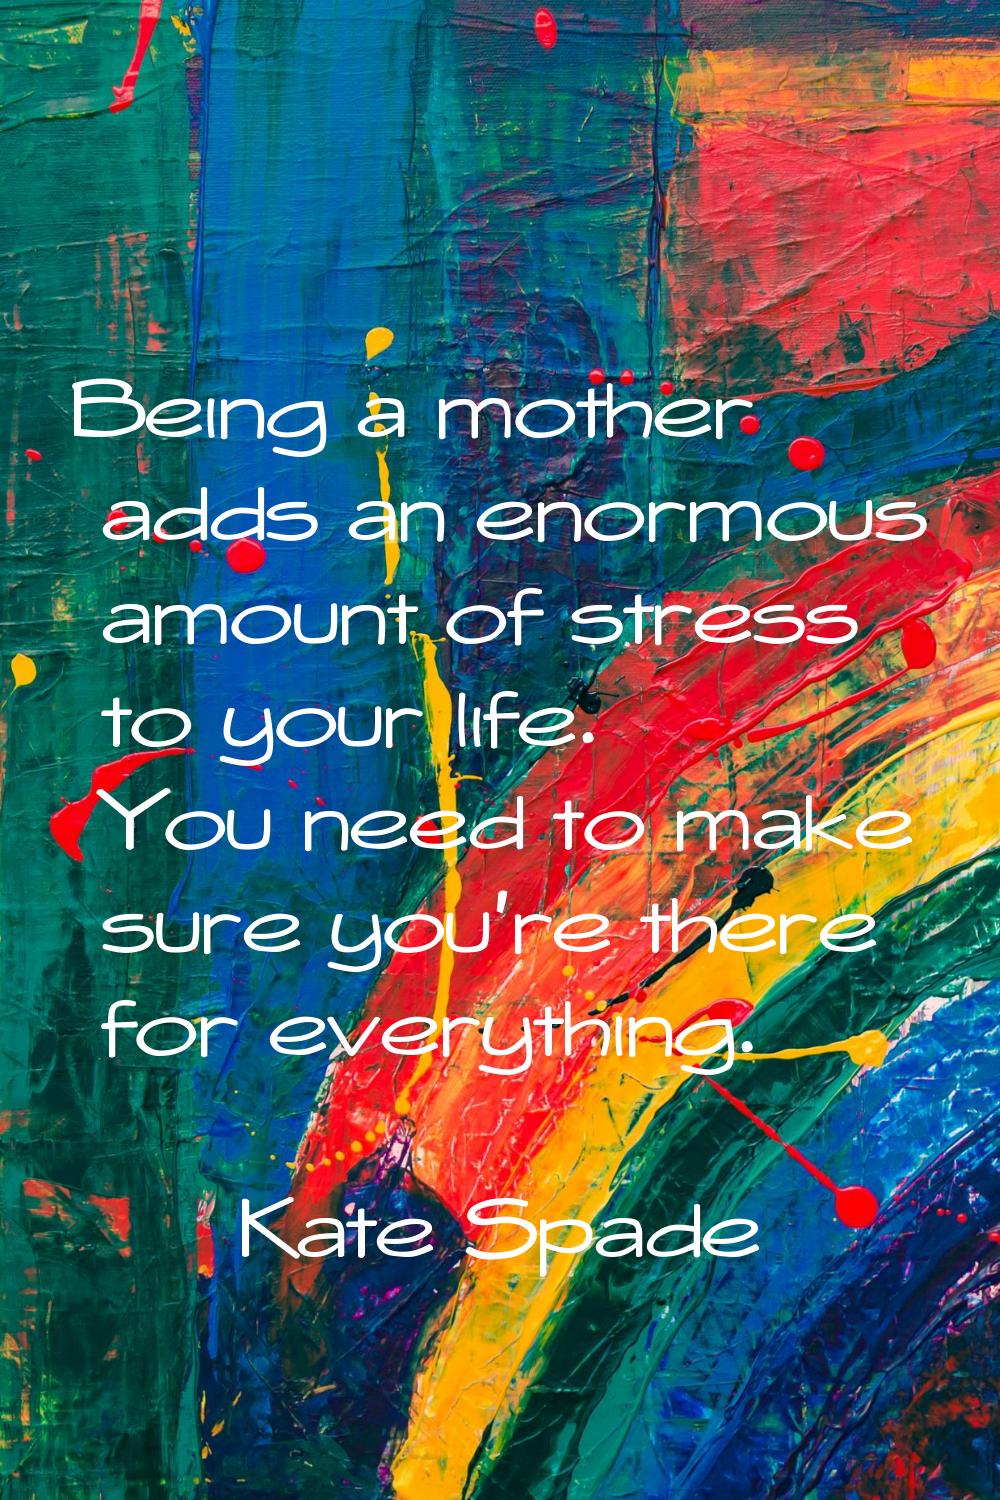 Being a mother adds an enormous amount of stress to your life. You need to make sure you're there f